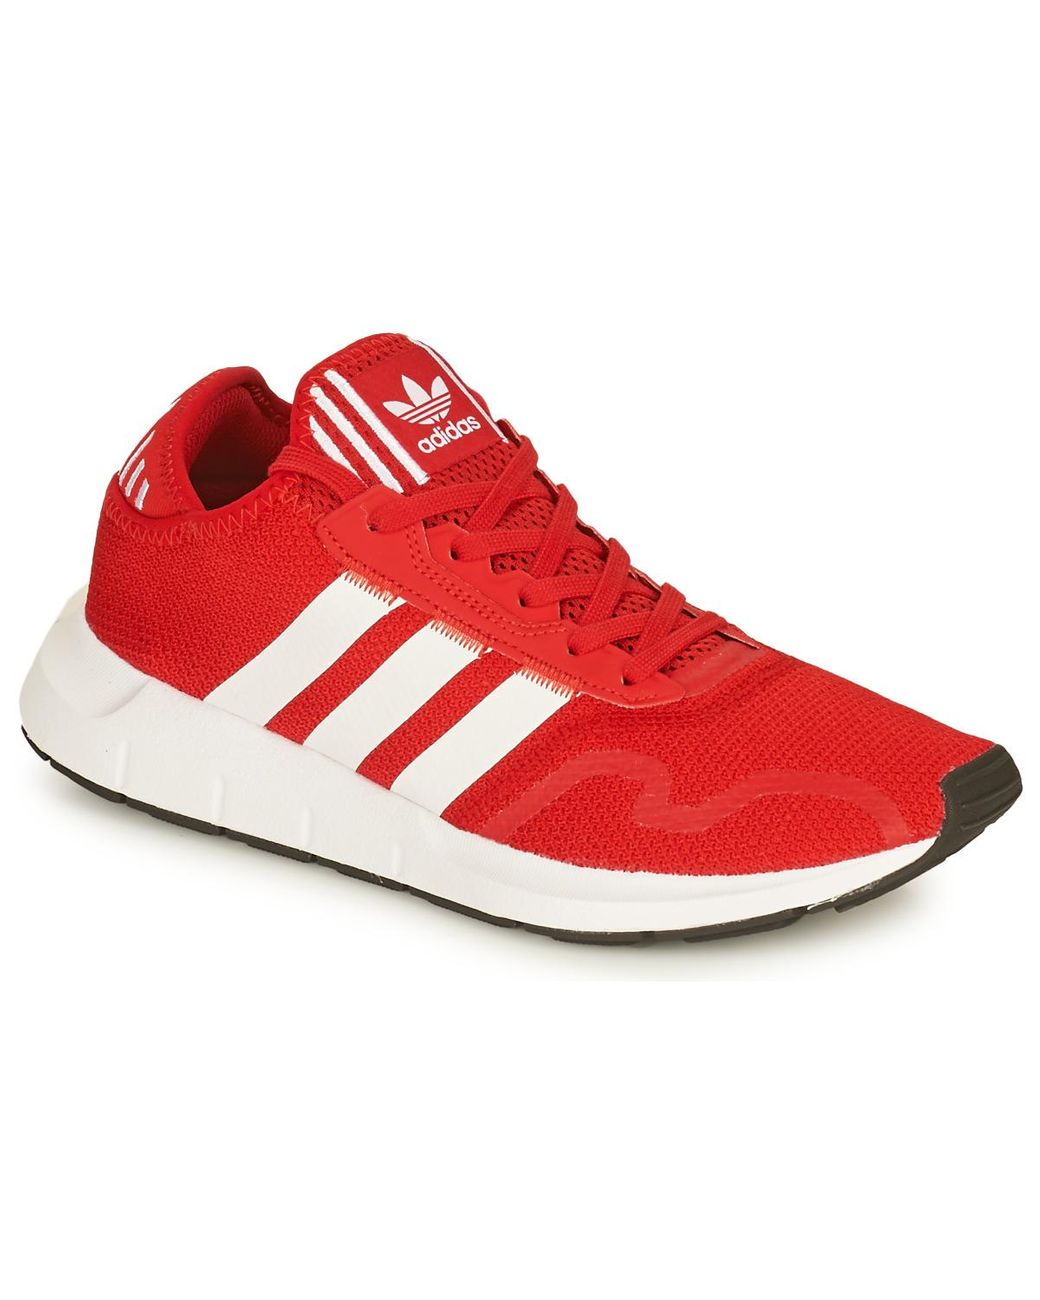 adidas Swift Run X Shoes (trainers) in Red | Lyst UK